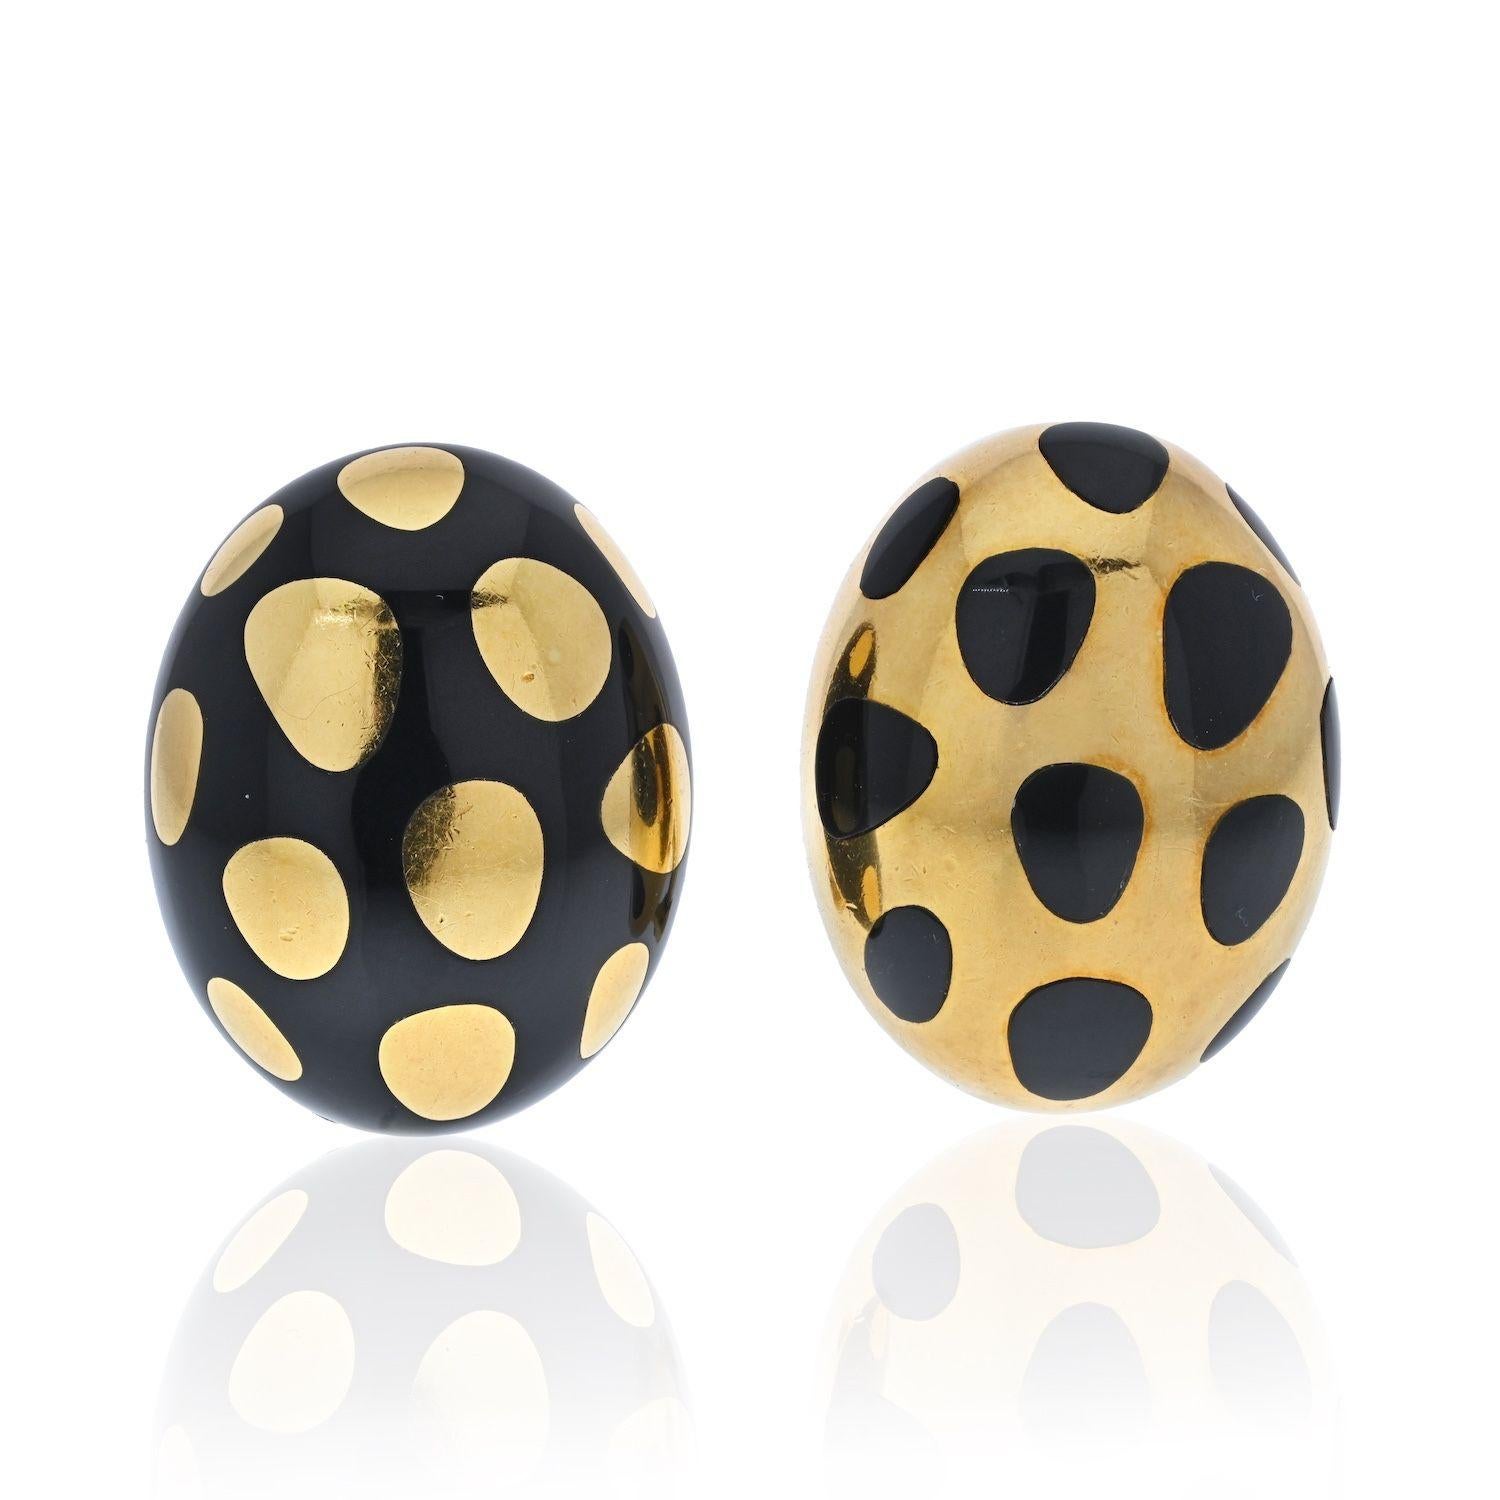 Rare and iconic Positive & Negative pieces created back in the 1974 in New York city at the Tiffany & Co. Atelier. This earrings was crafted in solid yellow gold of 18 karats, with high polished finish. They are suited with omega backs for fastening